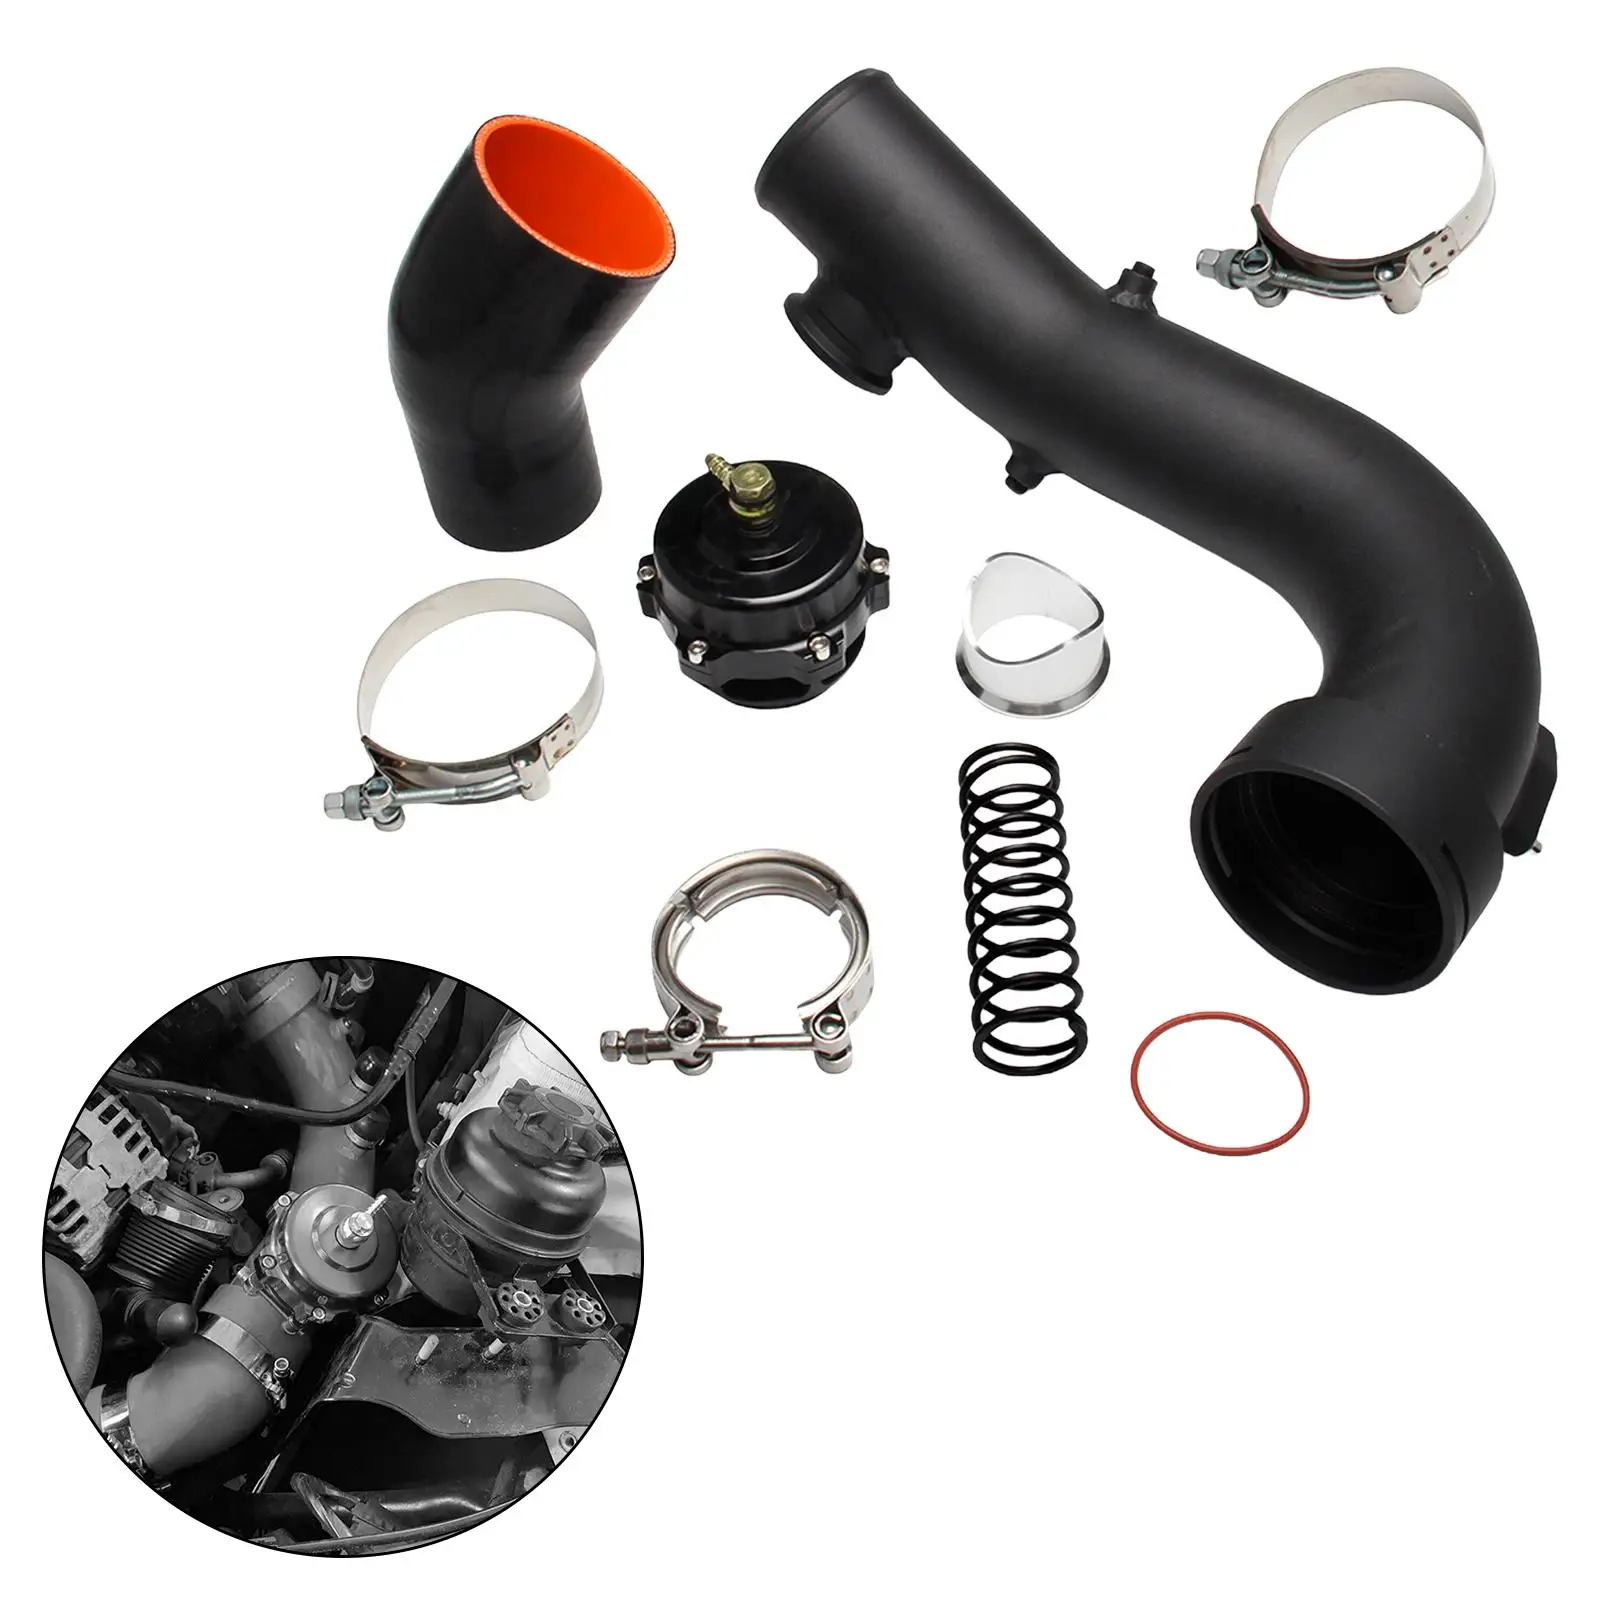 Air Intake Turbo Charge Pipe Cooling Kit for BMW N54 Replaces Easy to Install